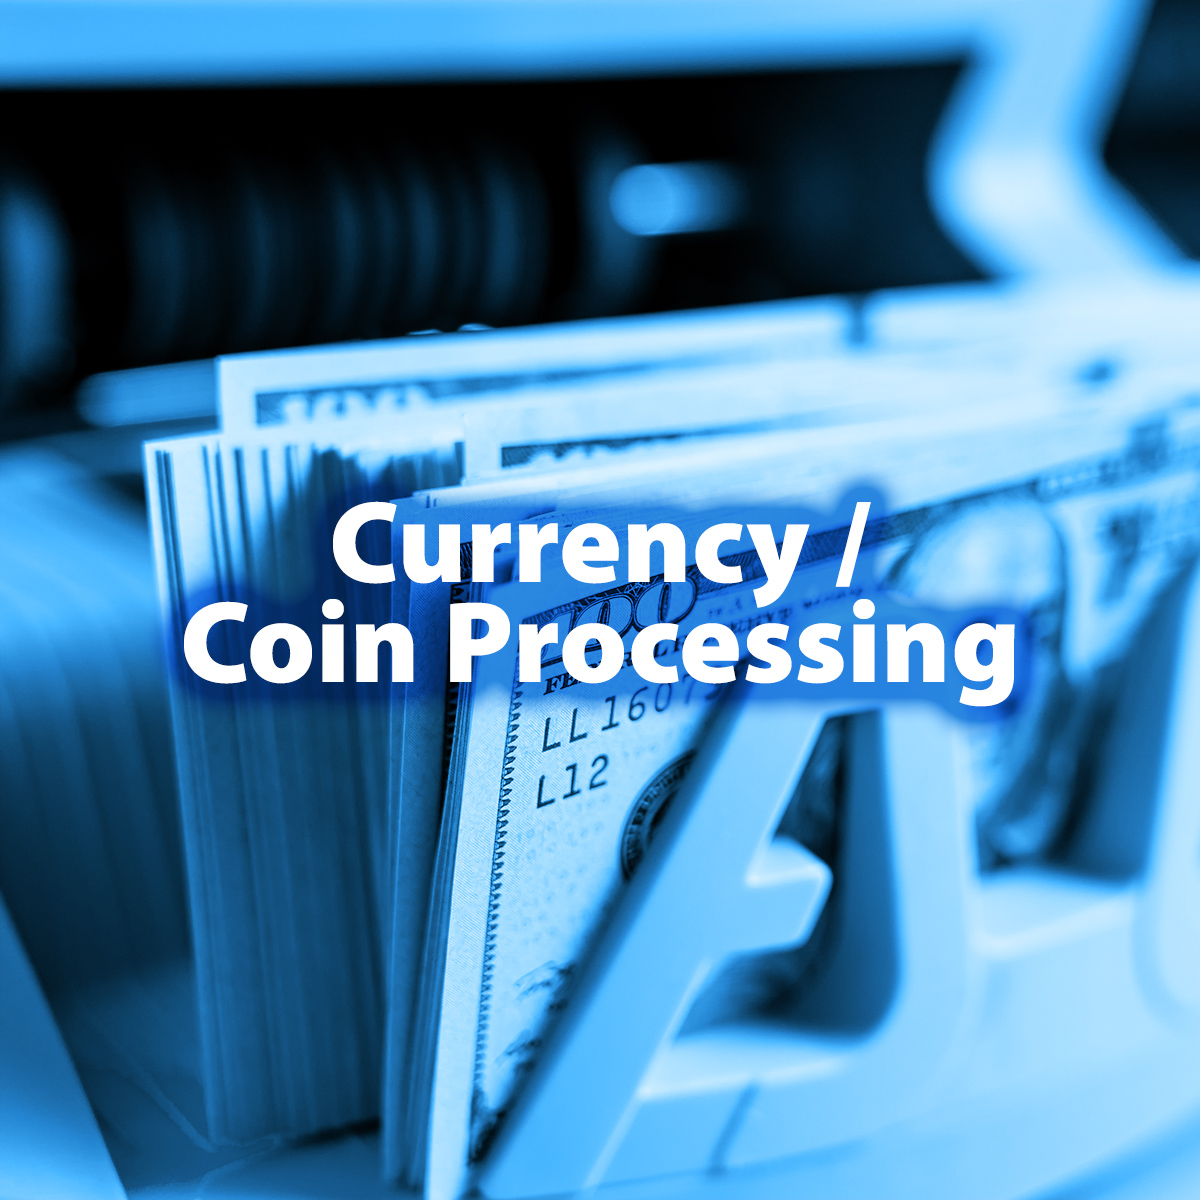 Currency / Coin Processing